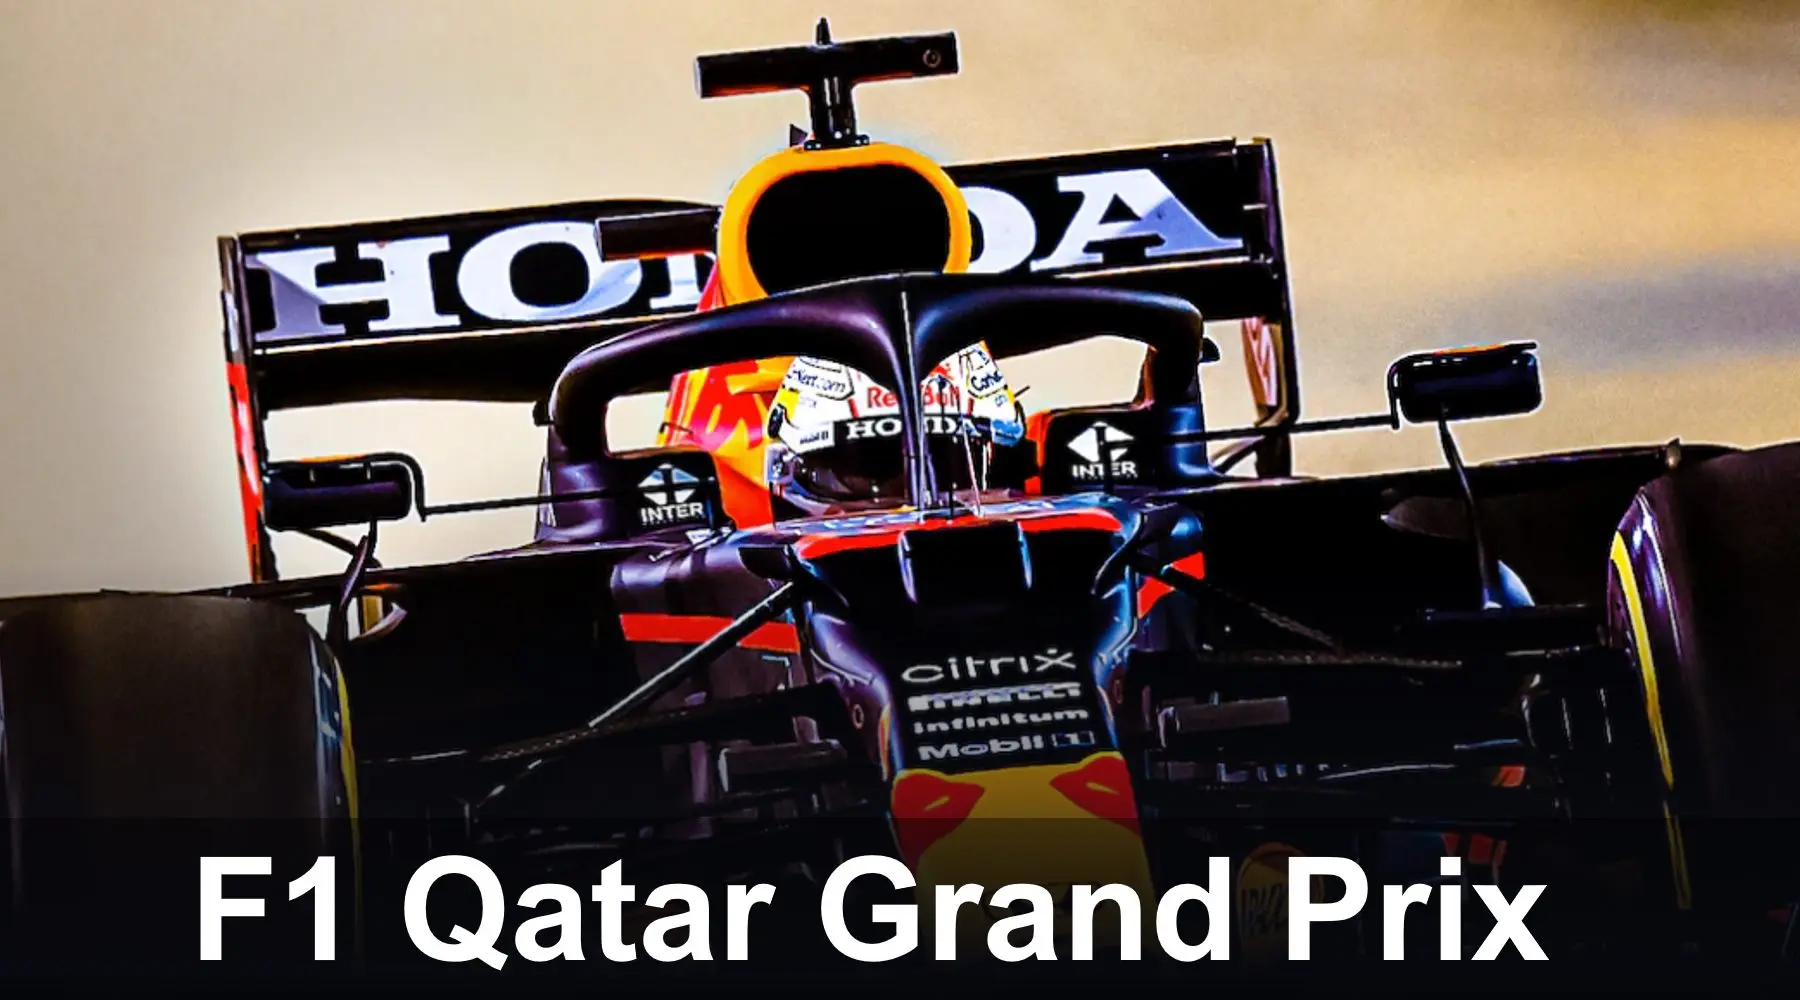 How to watch the Qatar Formula 1 Grand Prix live and free in Australia